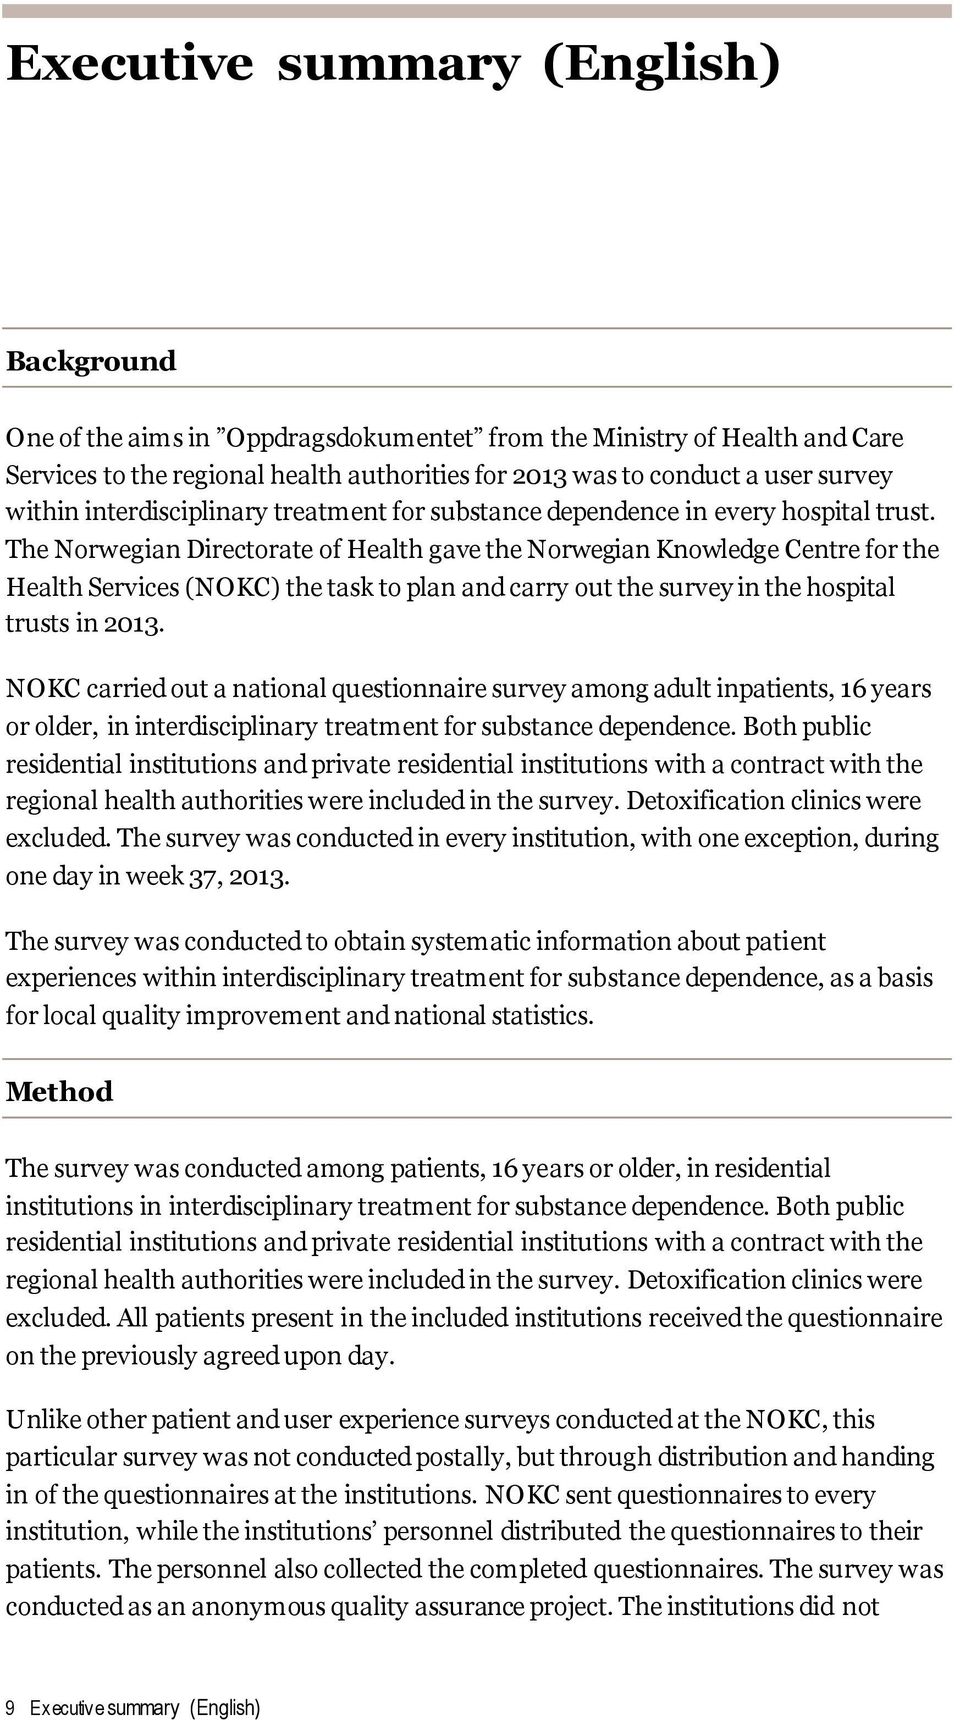 The Norwegian Directorate of Health gave the Norwegian Knowledge Centre for the Health Services (NOKC) the task to plan and carry out the survey in the hospital trusts in 2013.